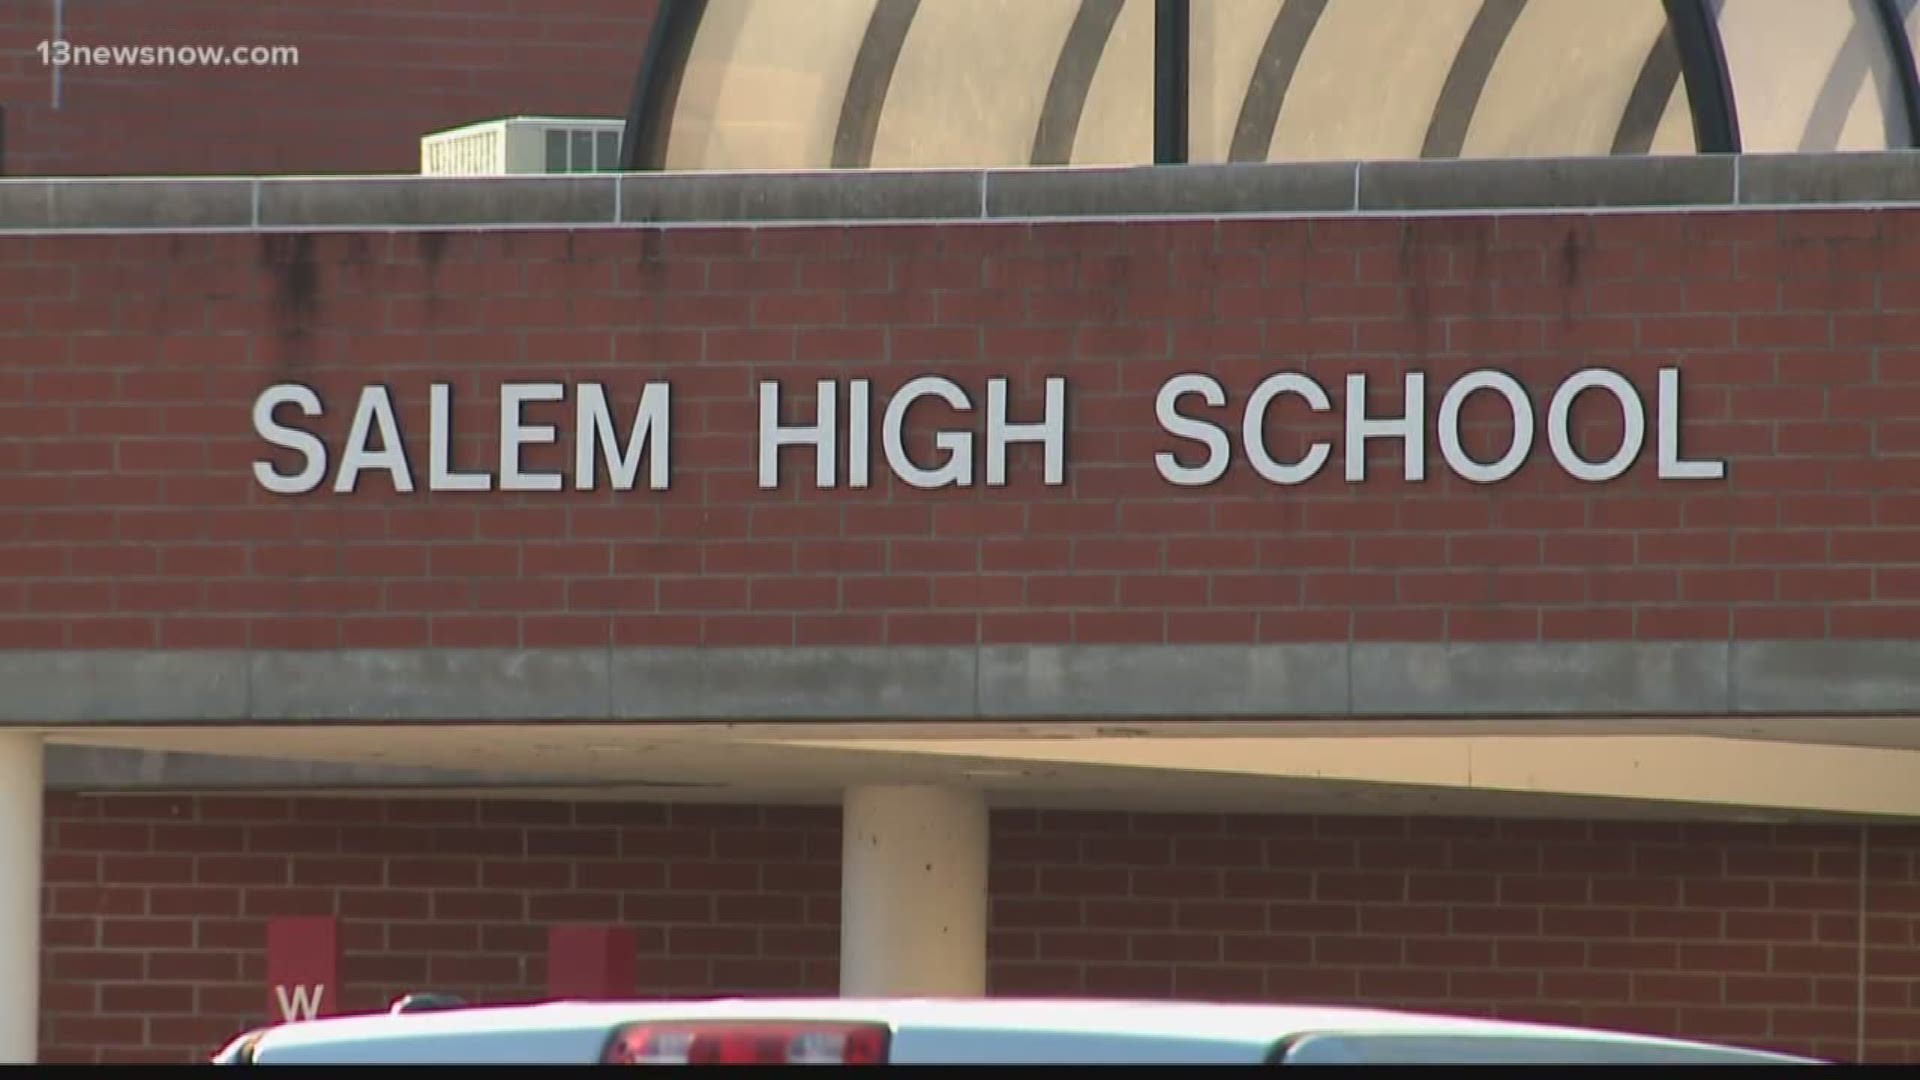 13News Now Jaclyn Lee has an update on what happened at Salem High School in Virginia Beach this morning.